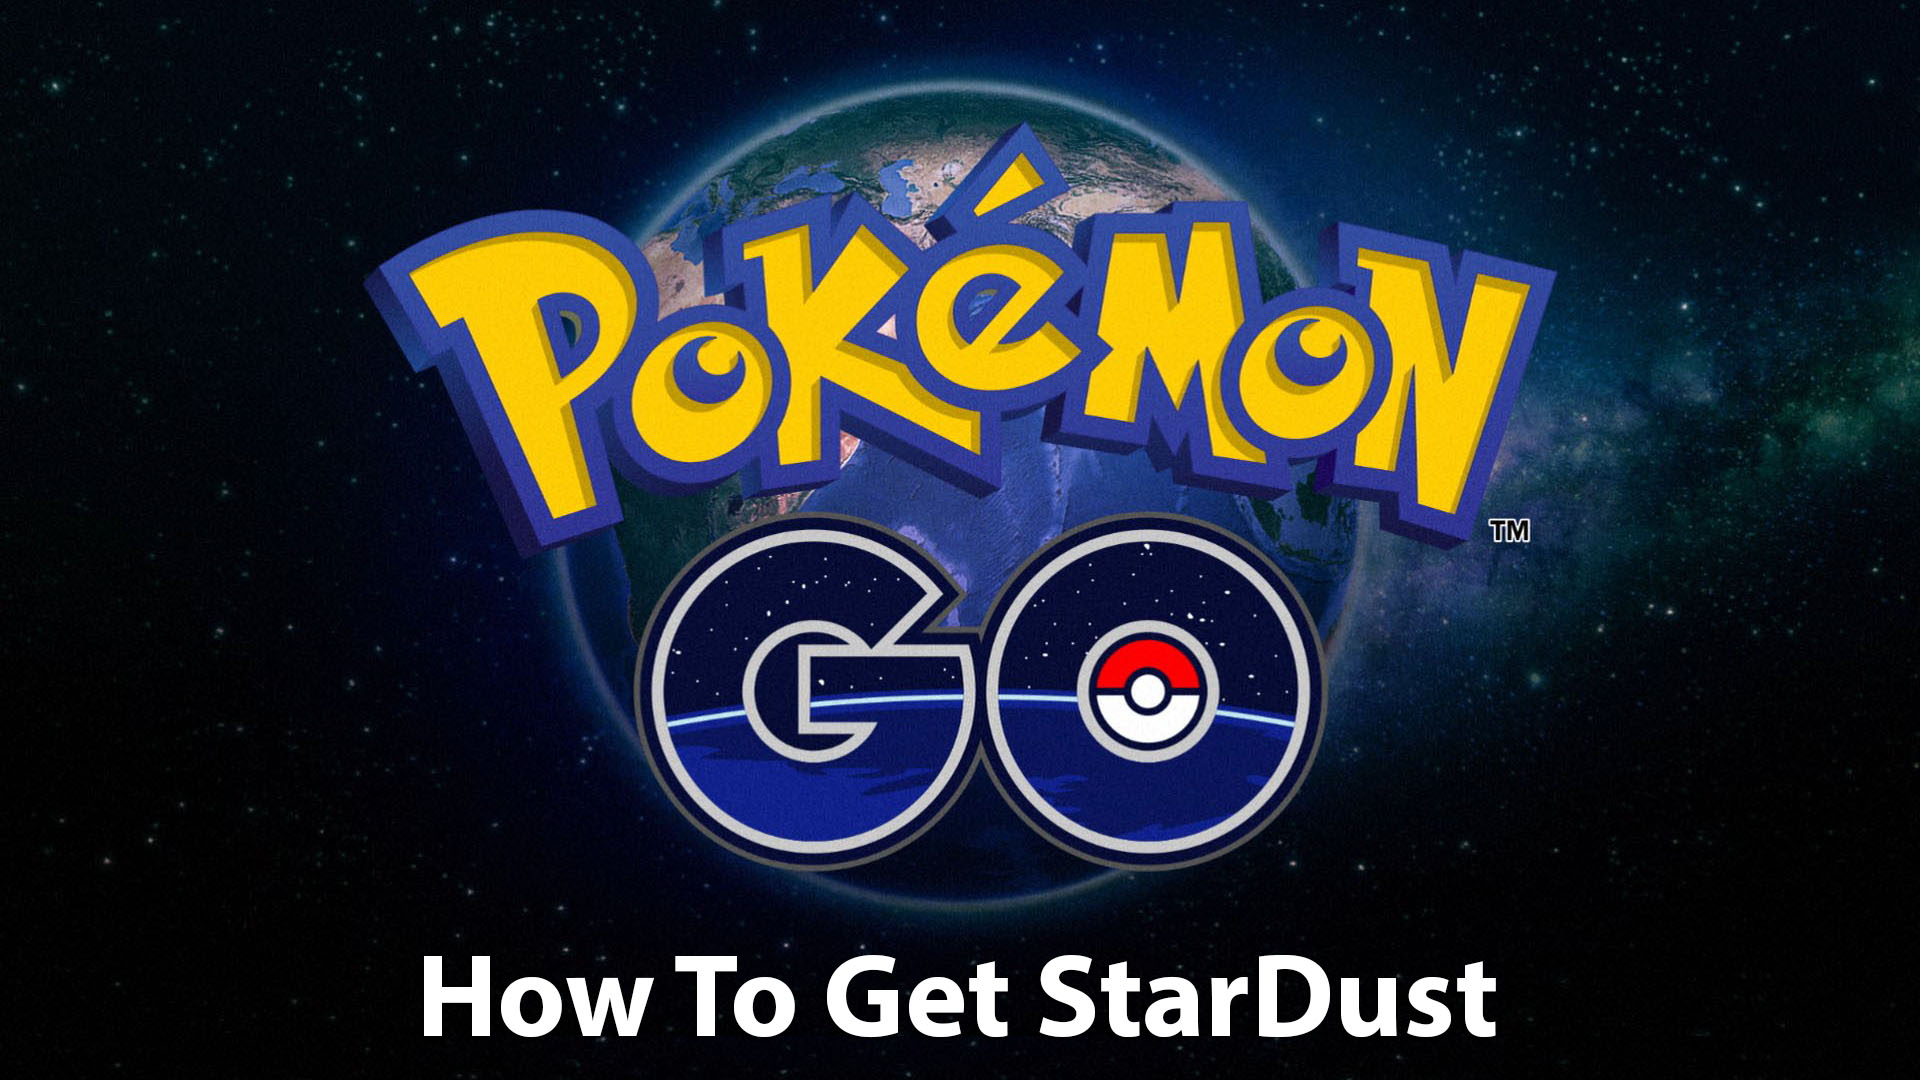 How to Get StarDust in Pokemon Go